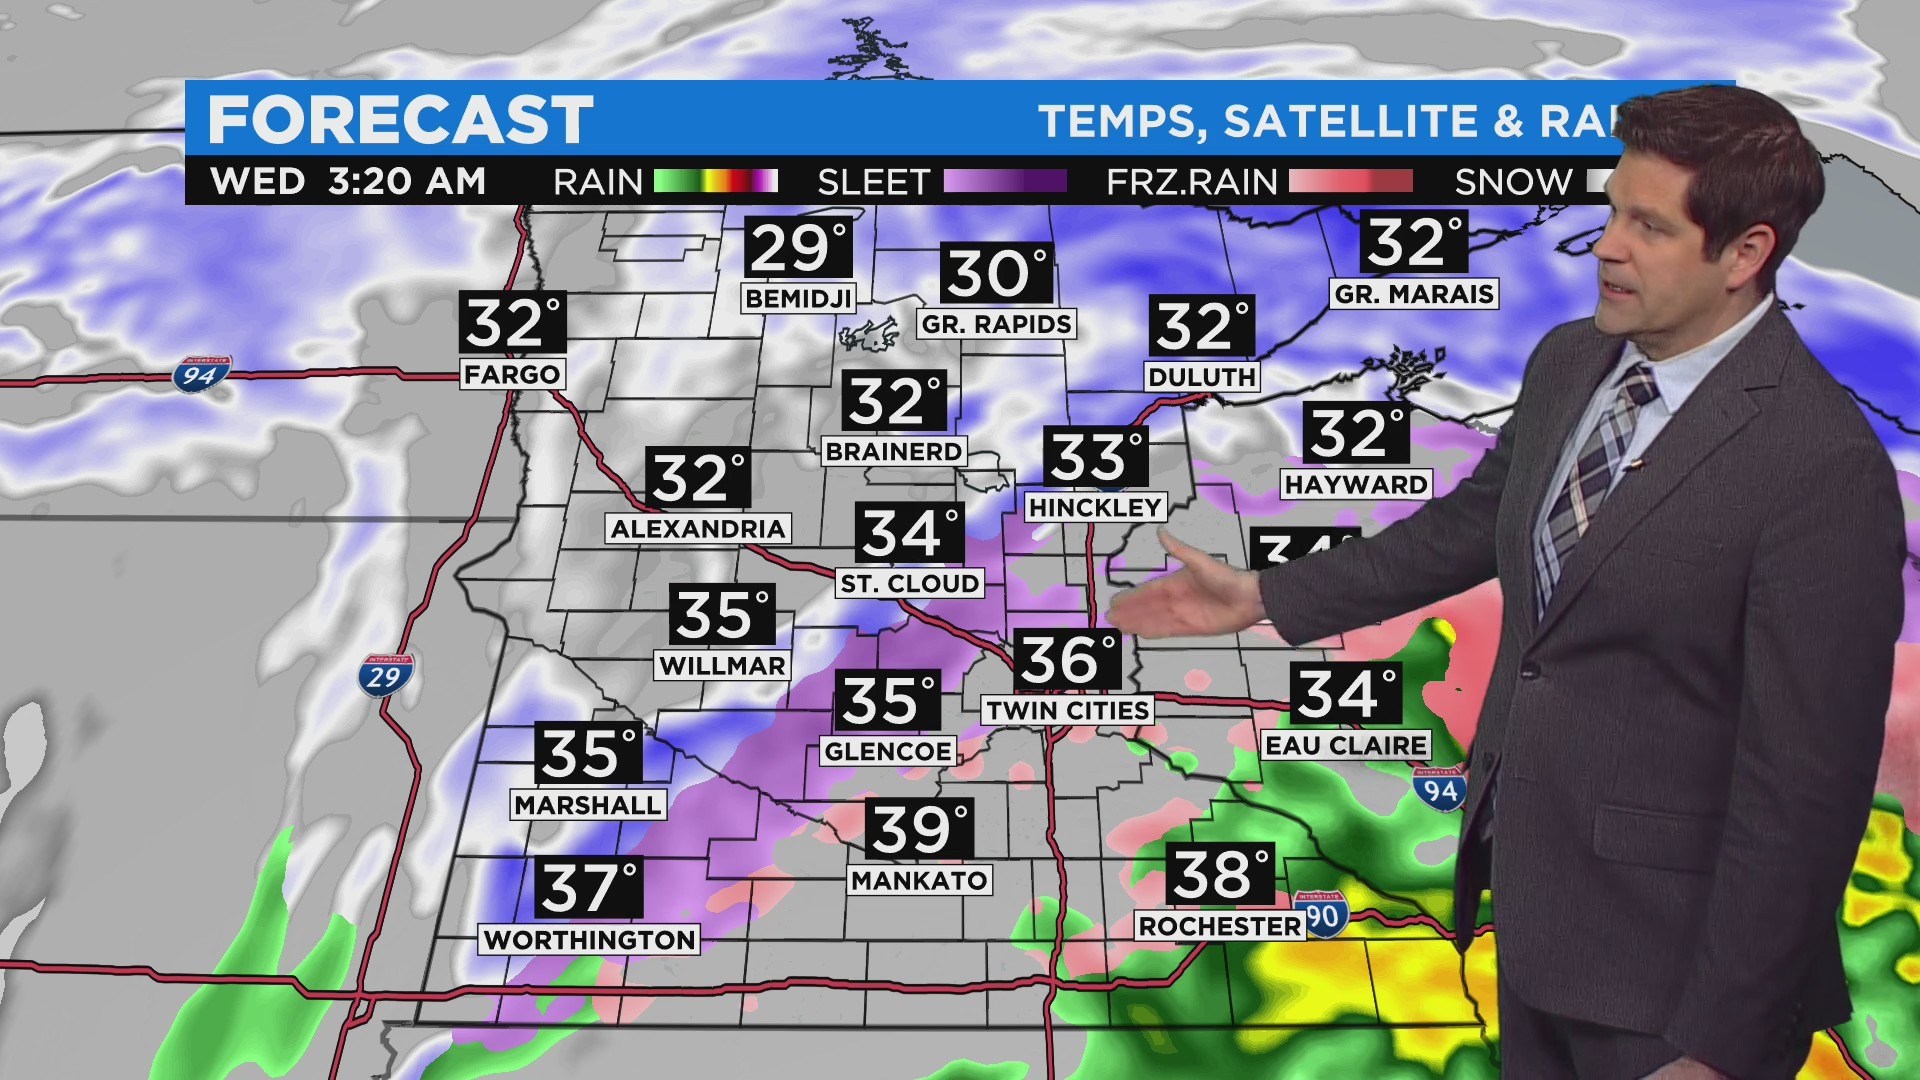 Minnesota Weather: Cool start to the week, with winter storms in the offing – WCCO